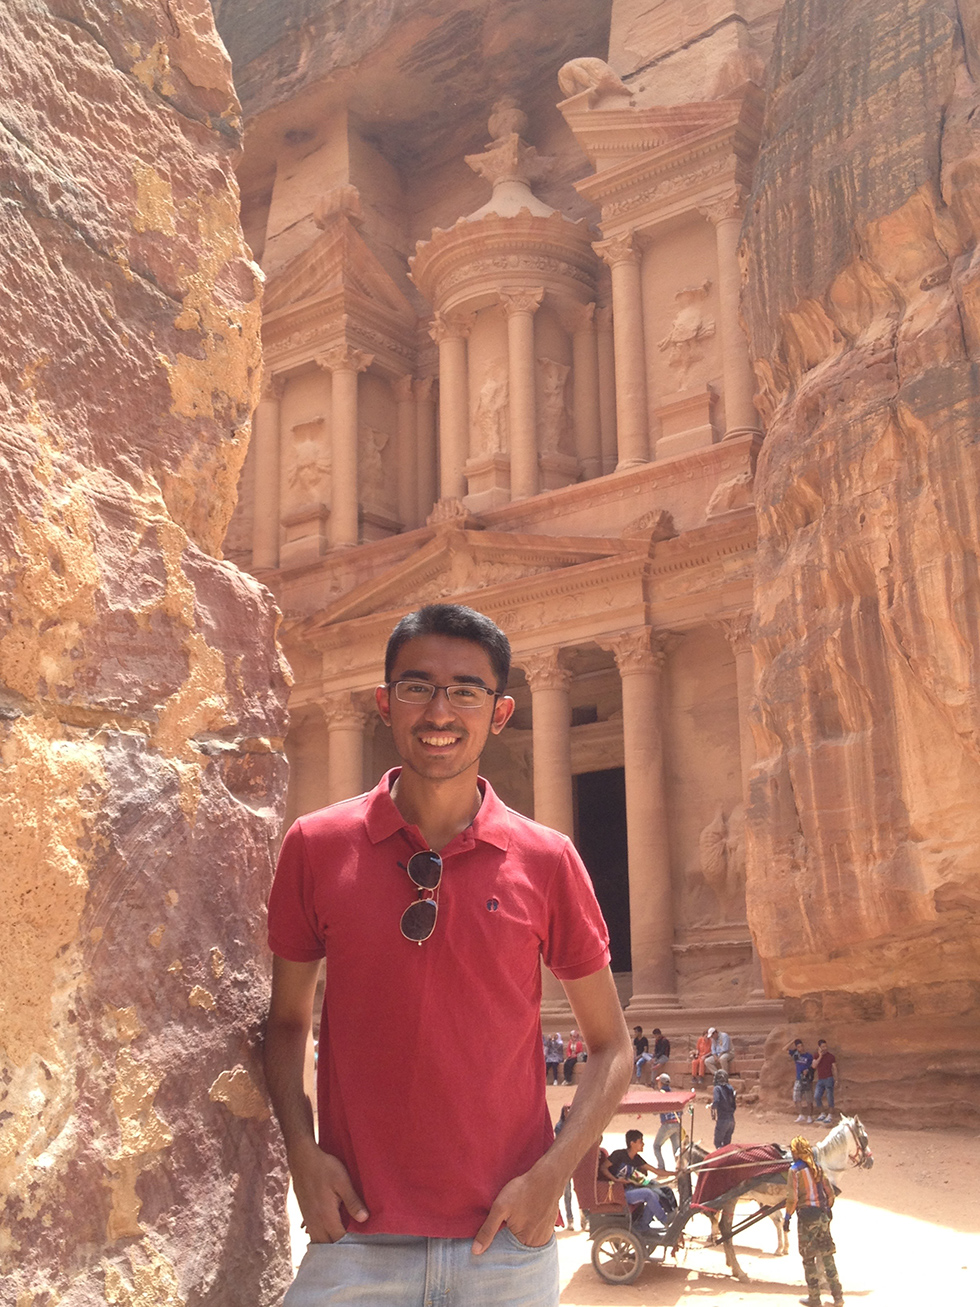 I Naishad Kai-ren standing in front of ancient architecture in Petra, Jordan